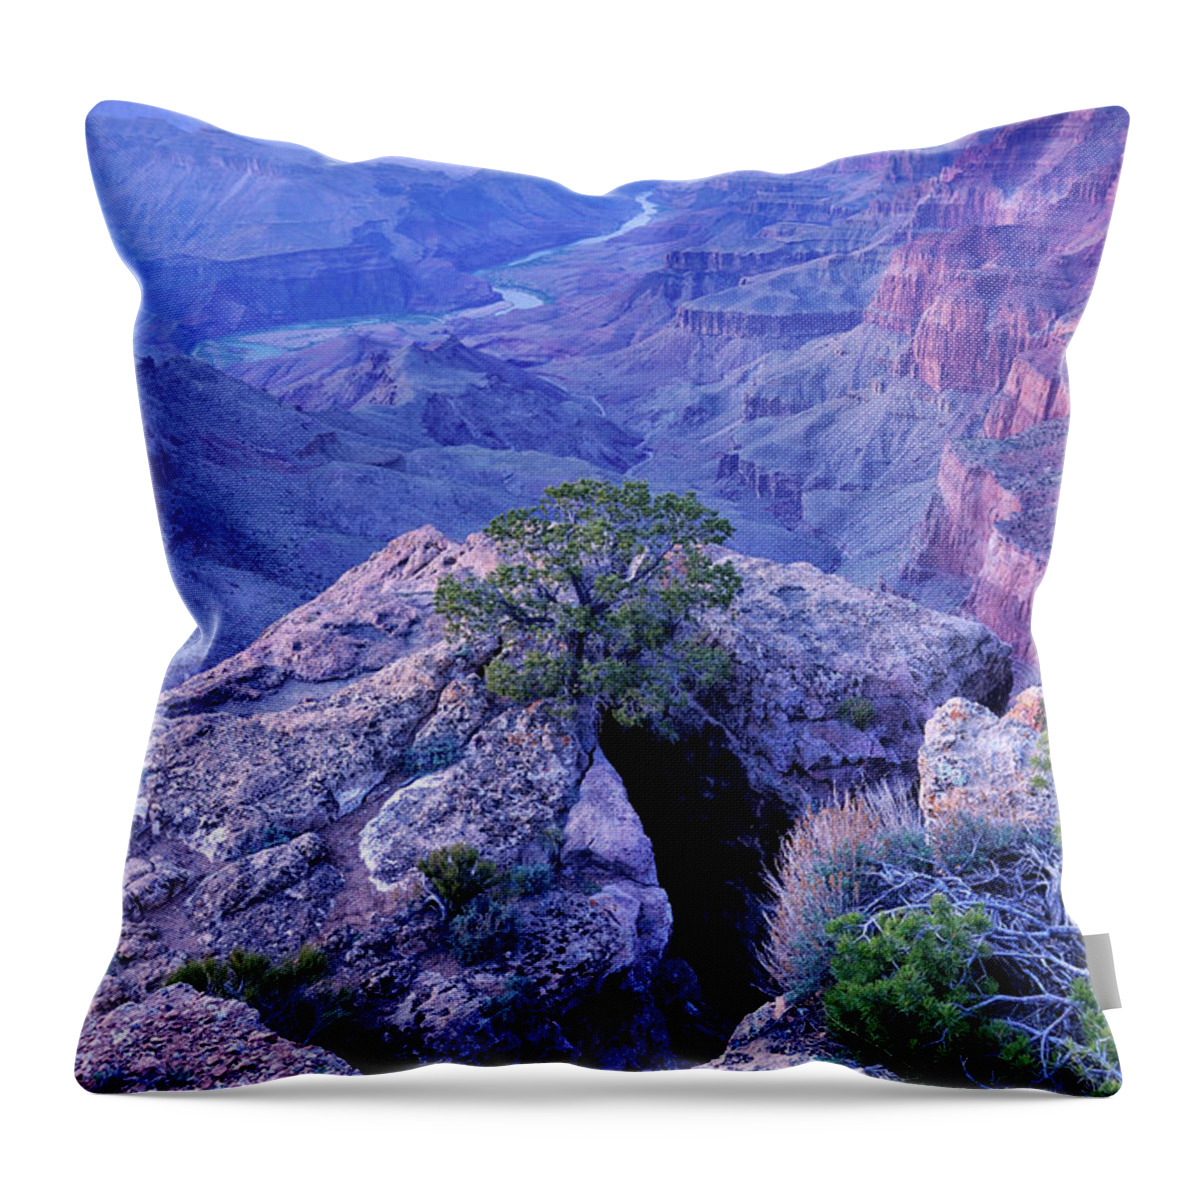 Scenics Throw Pillow featuring the photograph Twilight Landscape Of Grand Canyon #2 by Rezus